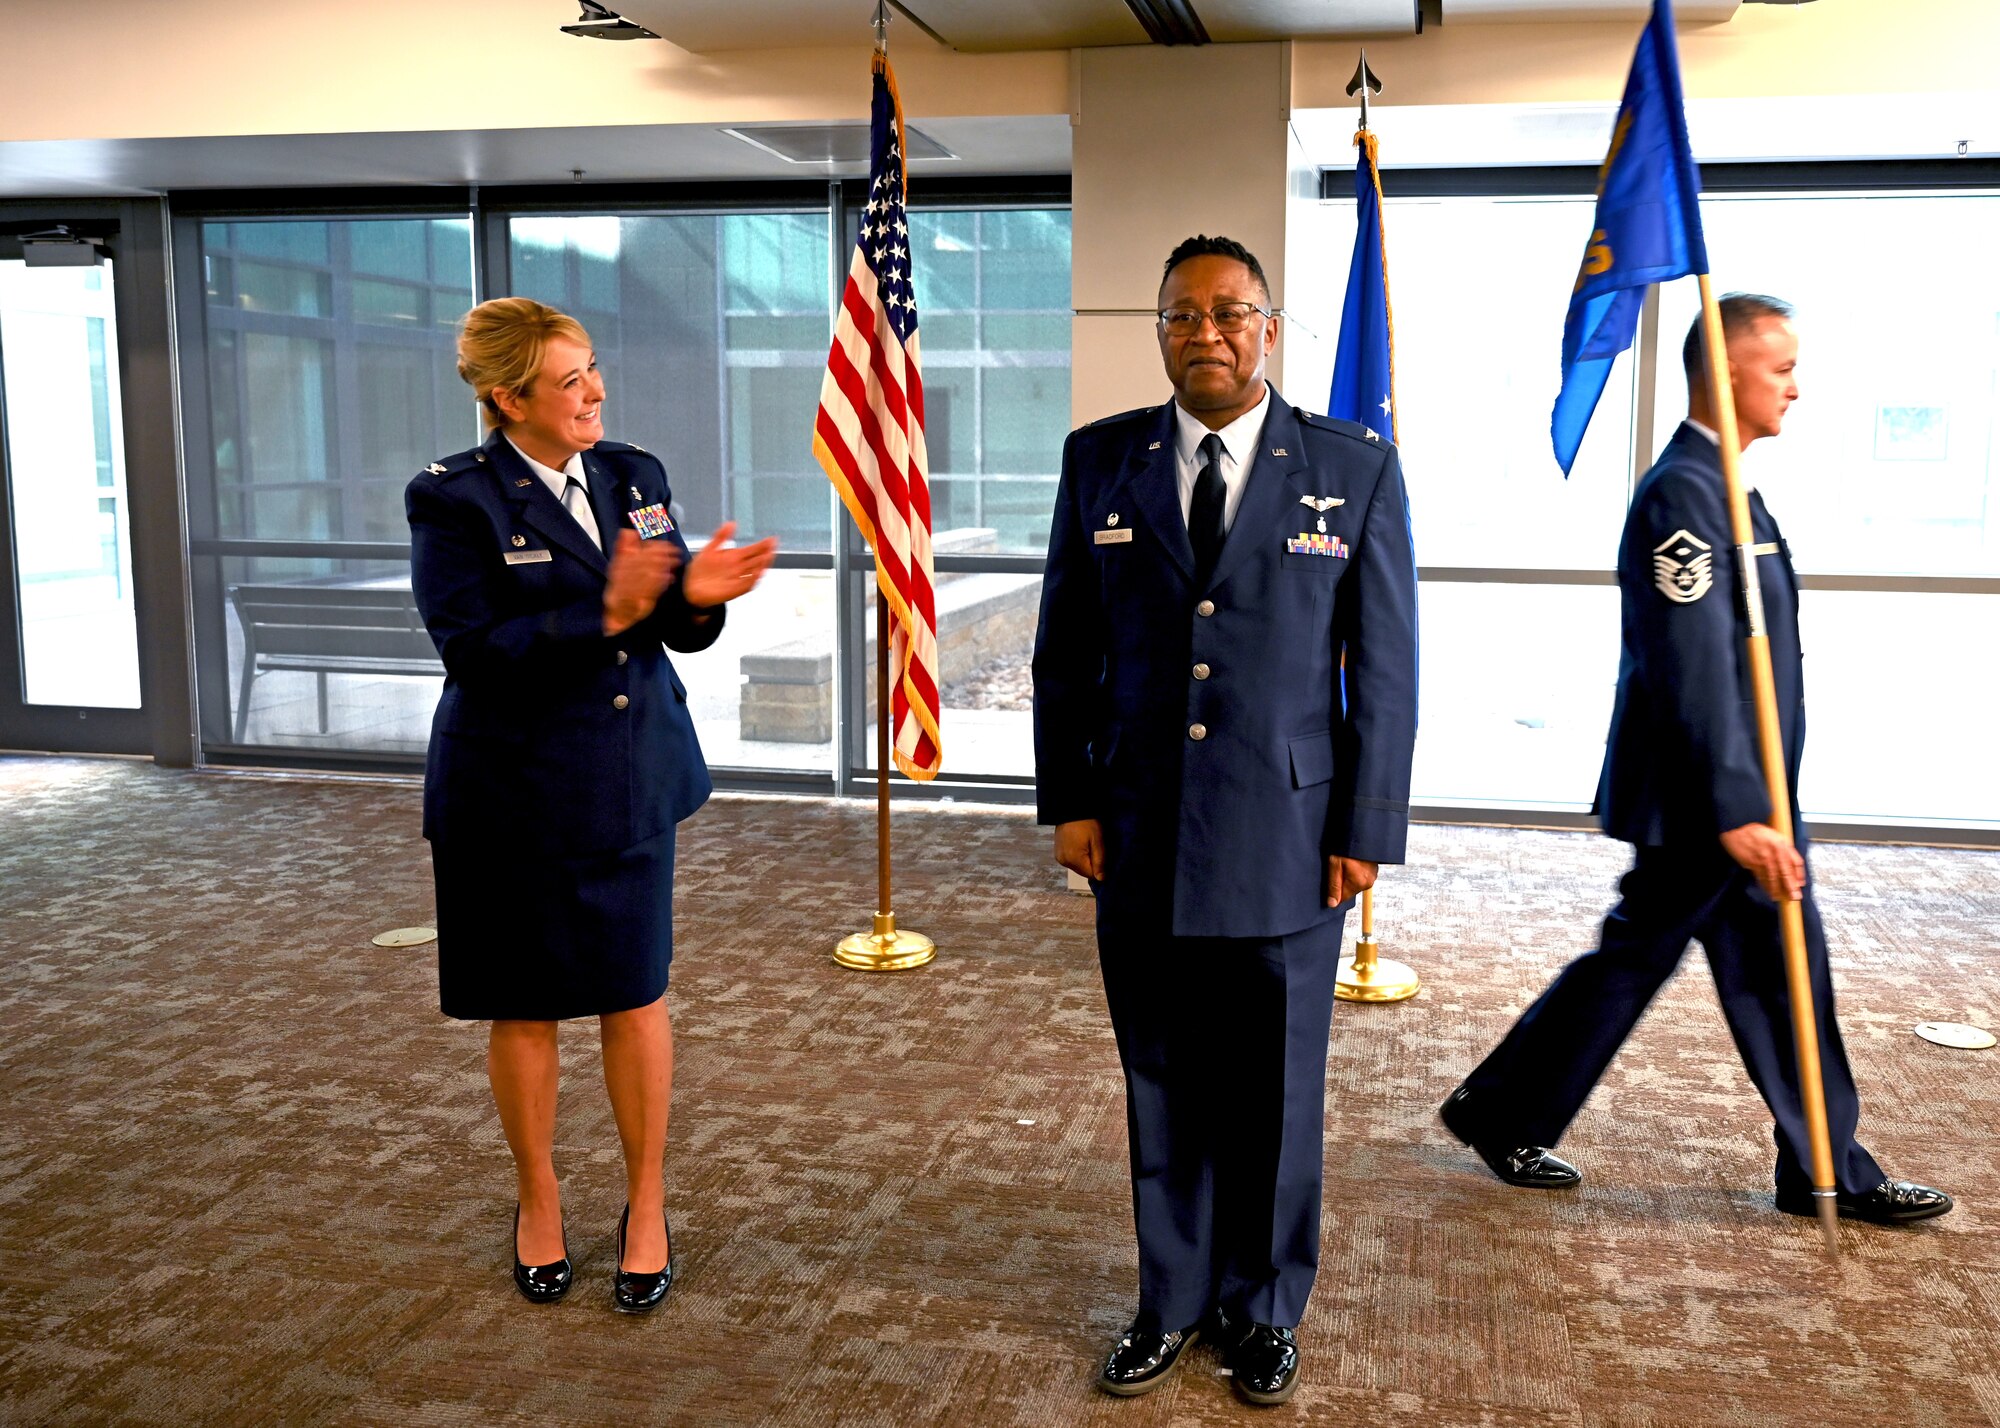 Col. Michelle Van Sickle, 433rd Medical Group commander, claps during the 433rd Medical Squadron assumption of command ceremony Oct. 16, 2022, where Col. Alvin Bradford assumed command, Joint Base San Antonio-Lackland, Texas. (U.S. Air Force photo by Staff Sgt. Monet Villacorte)